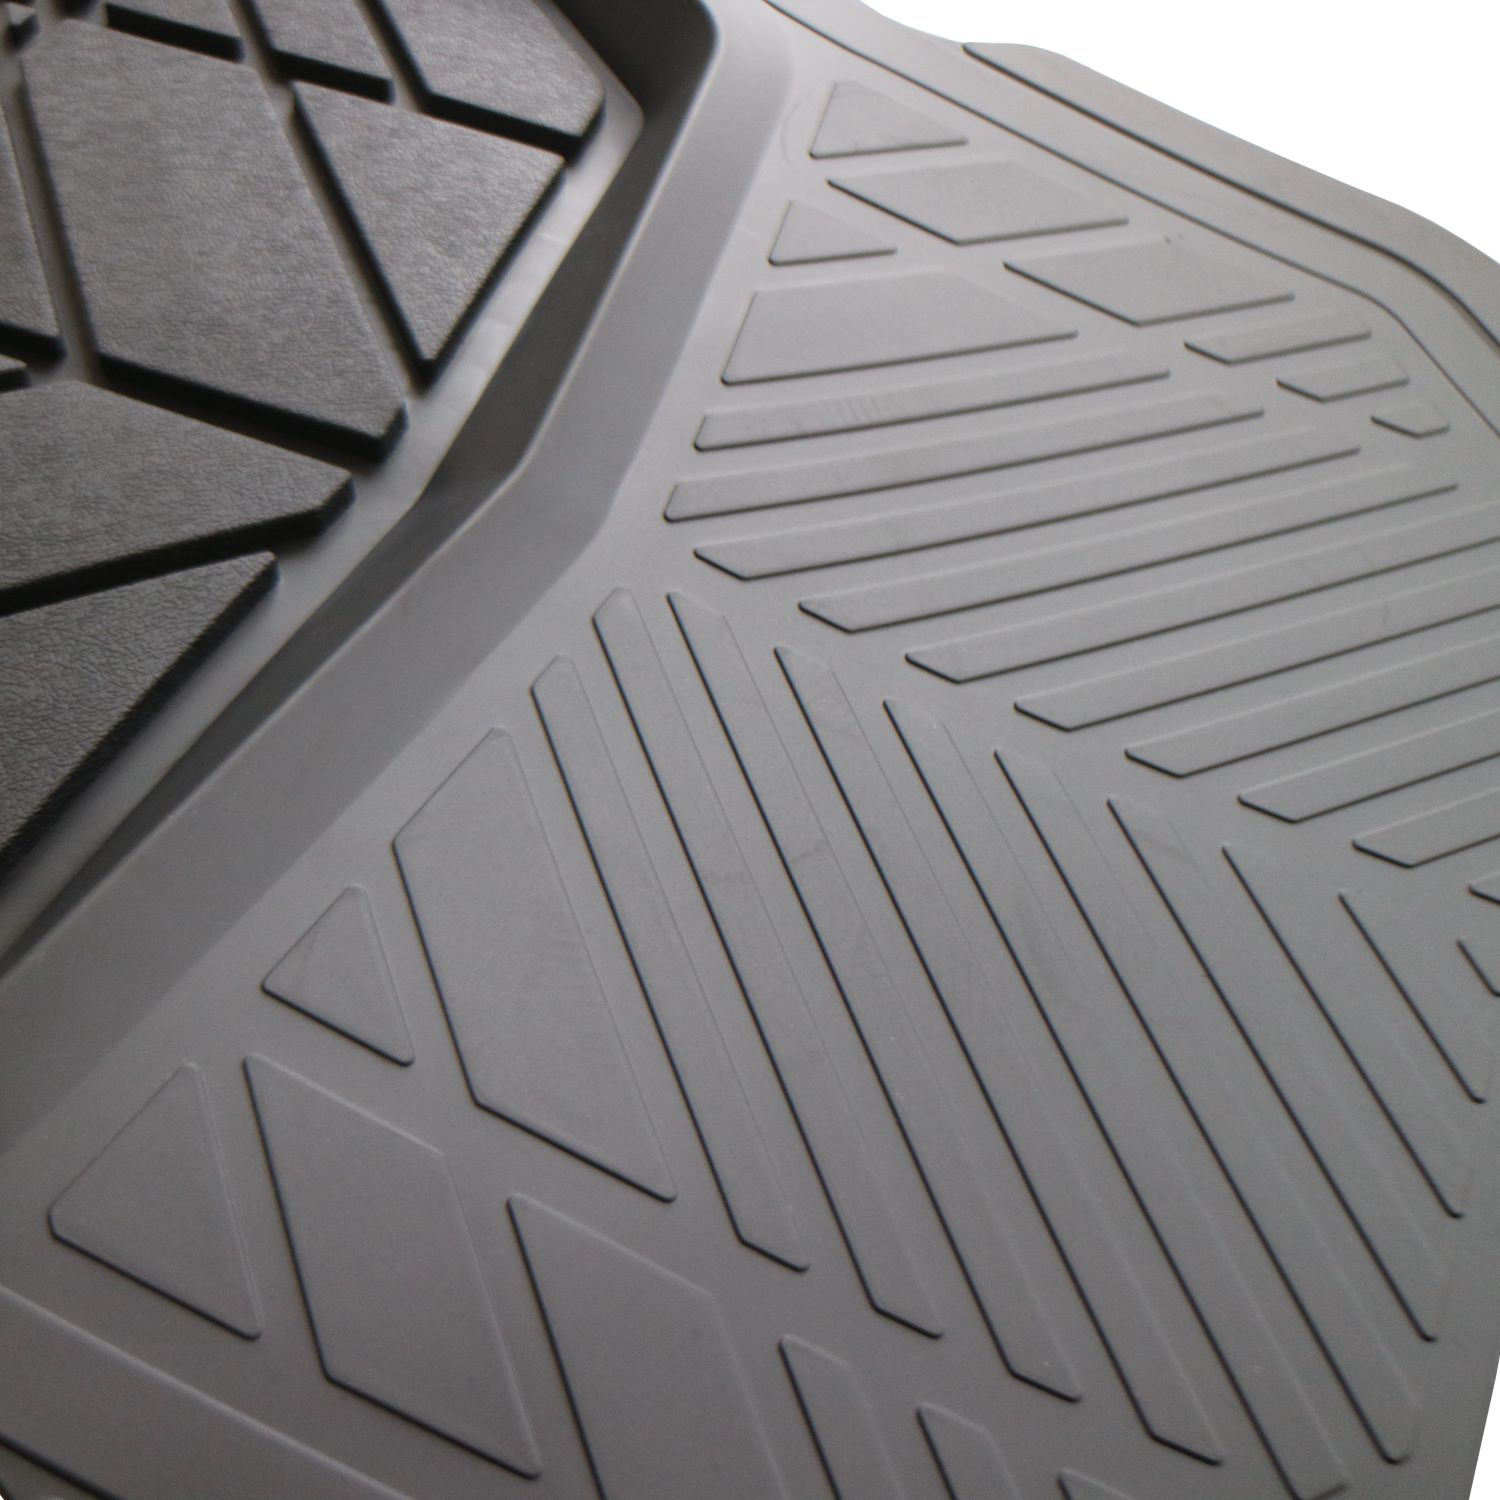 Molded Rubber Utility Mats